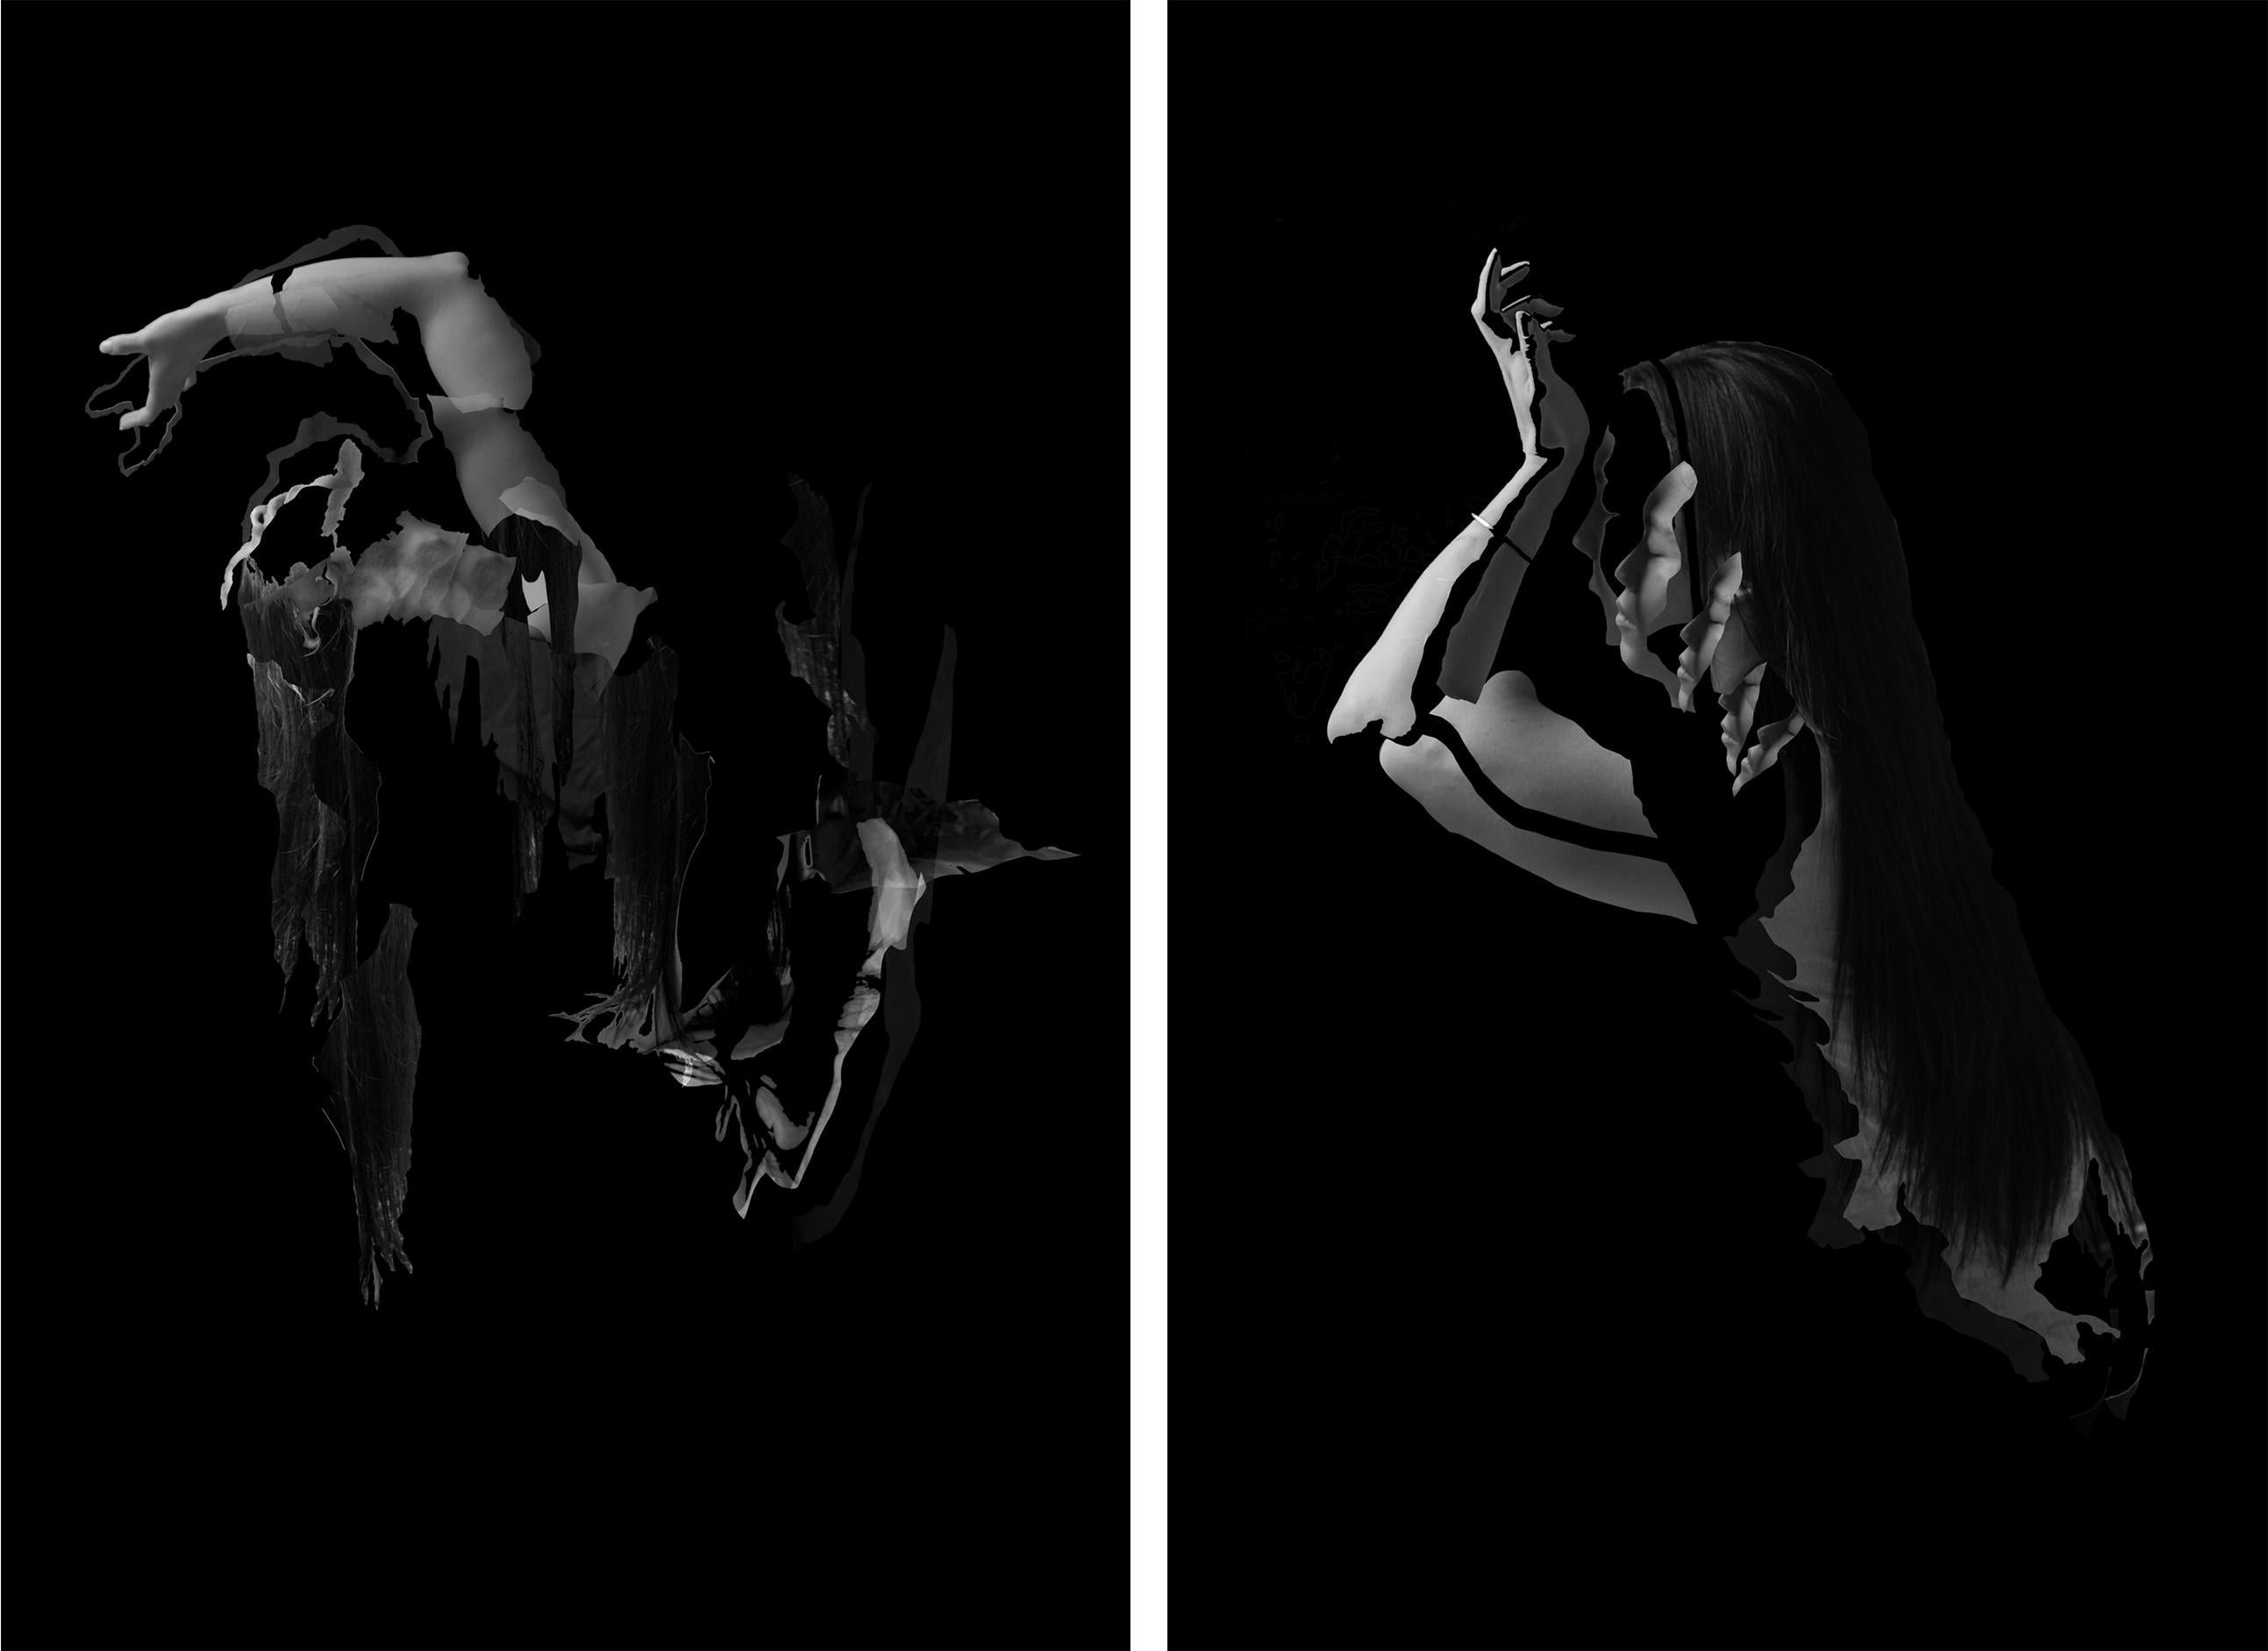 Ying Chen Figurative Photograph - Fragmented- Untitled 4 & 2, Diptych. Figurative Black and White Photographs